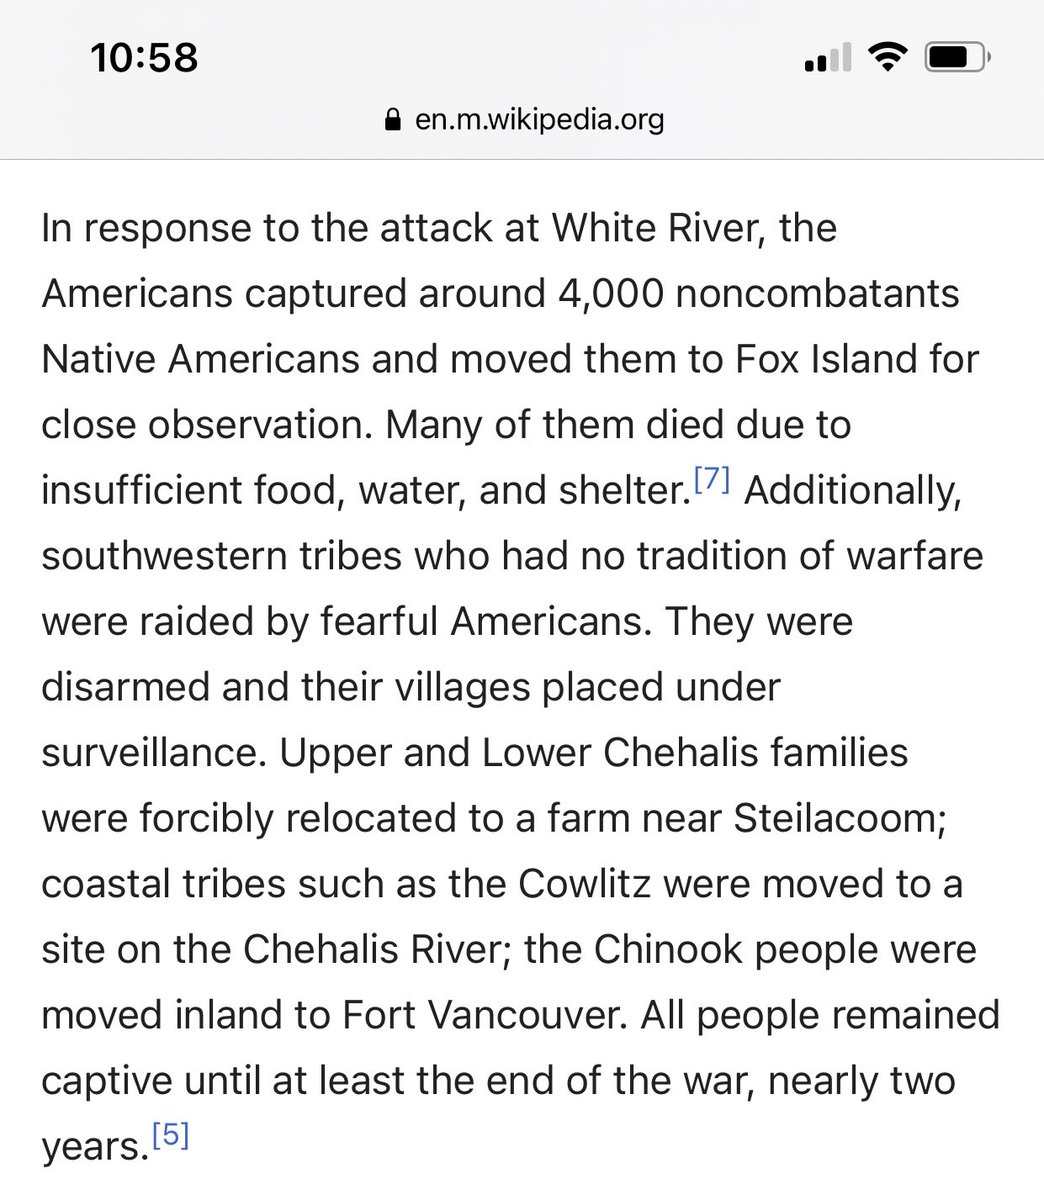 As is well-known, Harvey Scott decided to invest his time out west by volunteering for a local militia for the express task of killing Native Americans in order to take their land by force. (Looks like I didn’t finish my homework here)